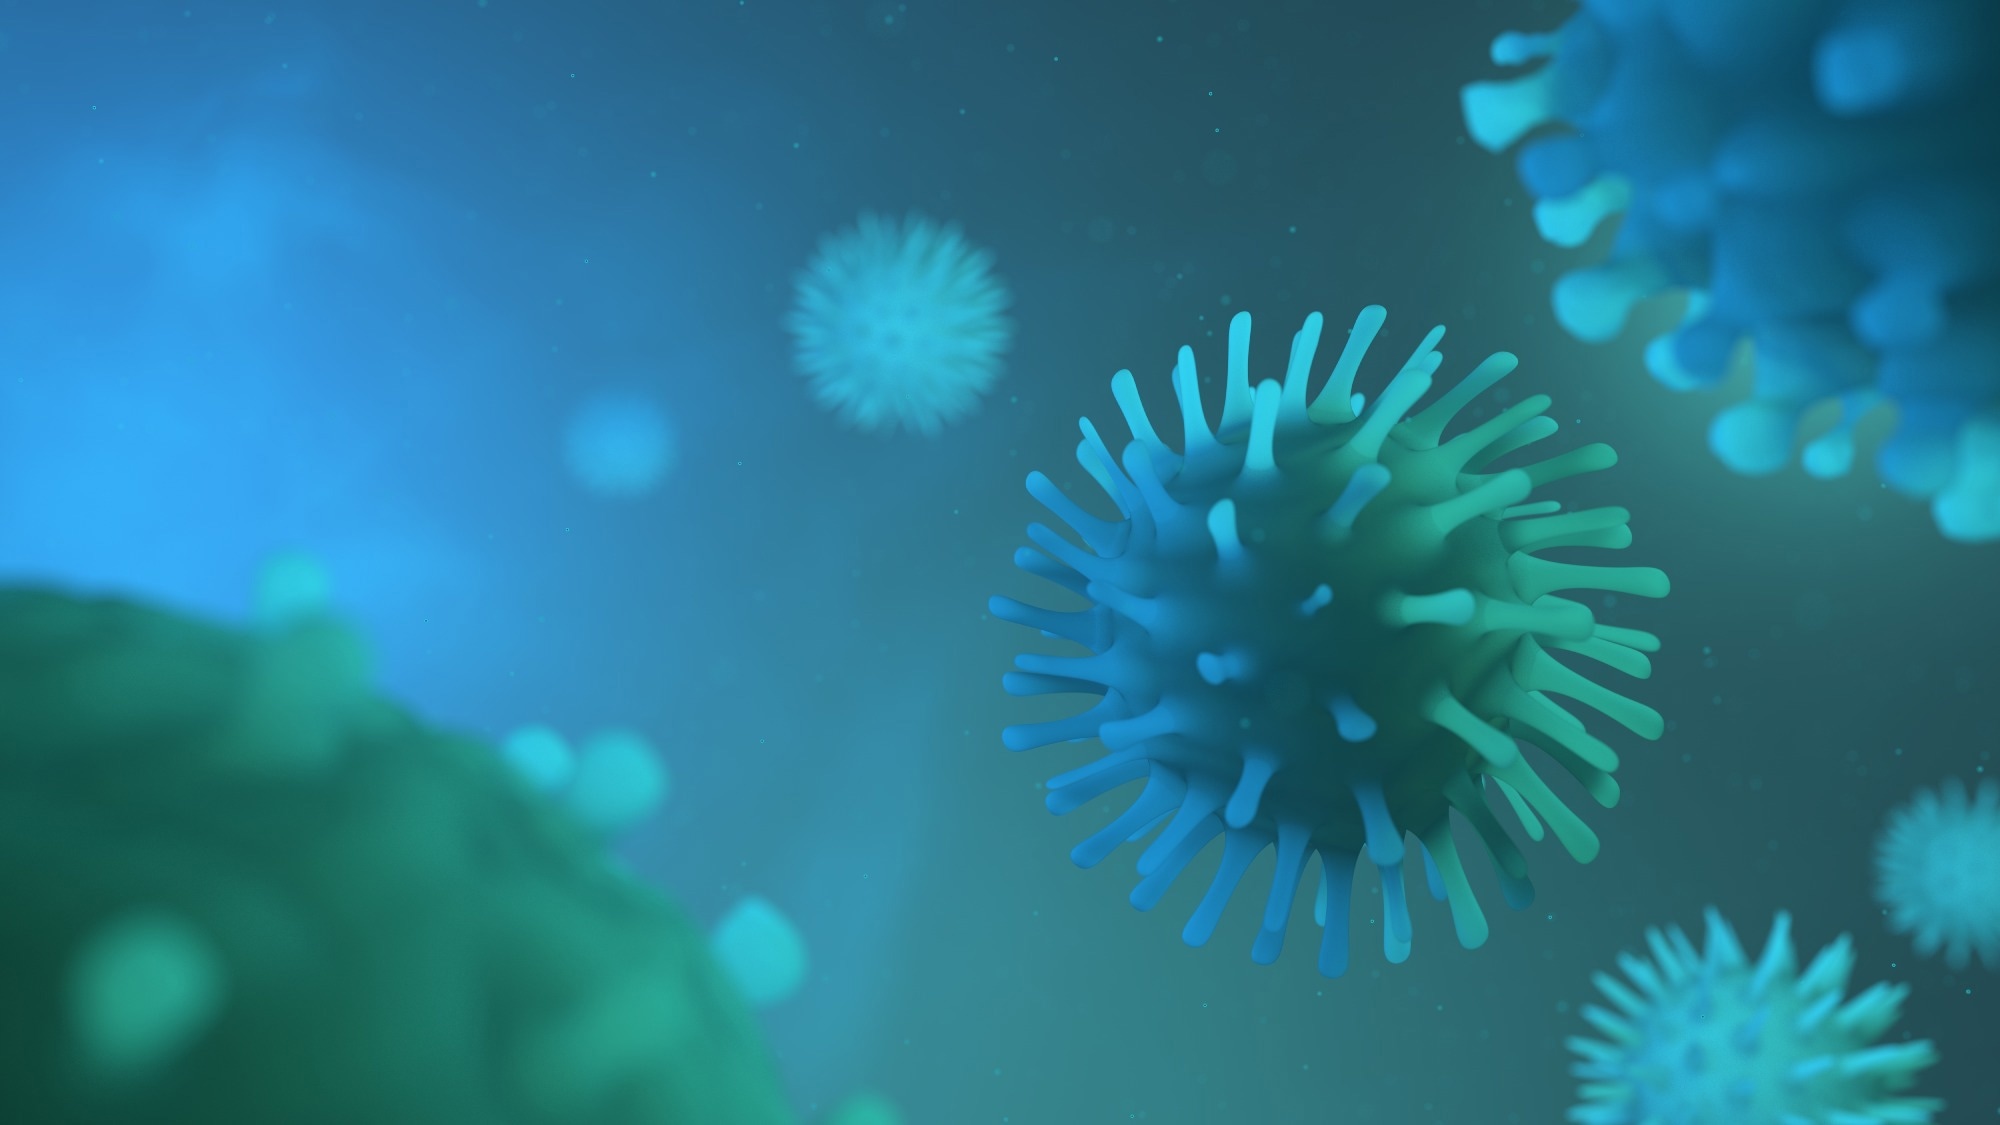 Study: Risk Factors and Predictive Modeling for Post-Acute Sequelae of SARS-CoV-2 Infection: Findings from EHR Cohorts of the RECOVER Initiative. Image Credit: CROCOTHERY/Shutterstock